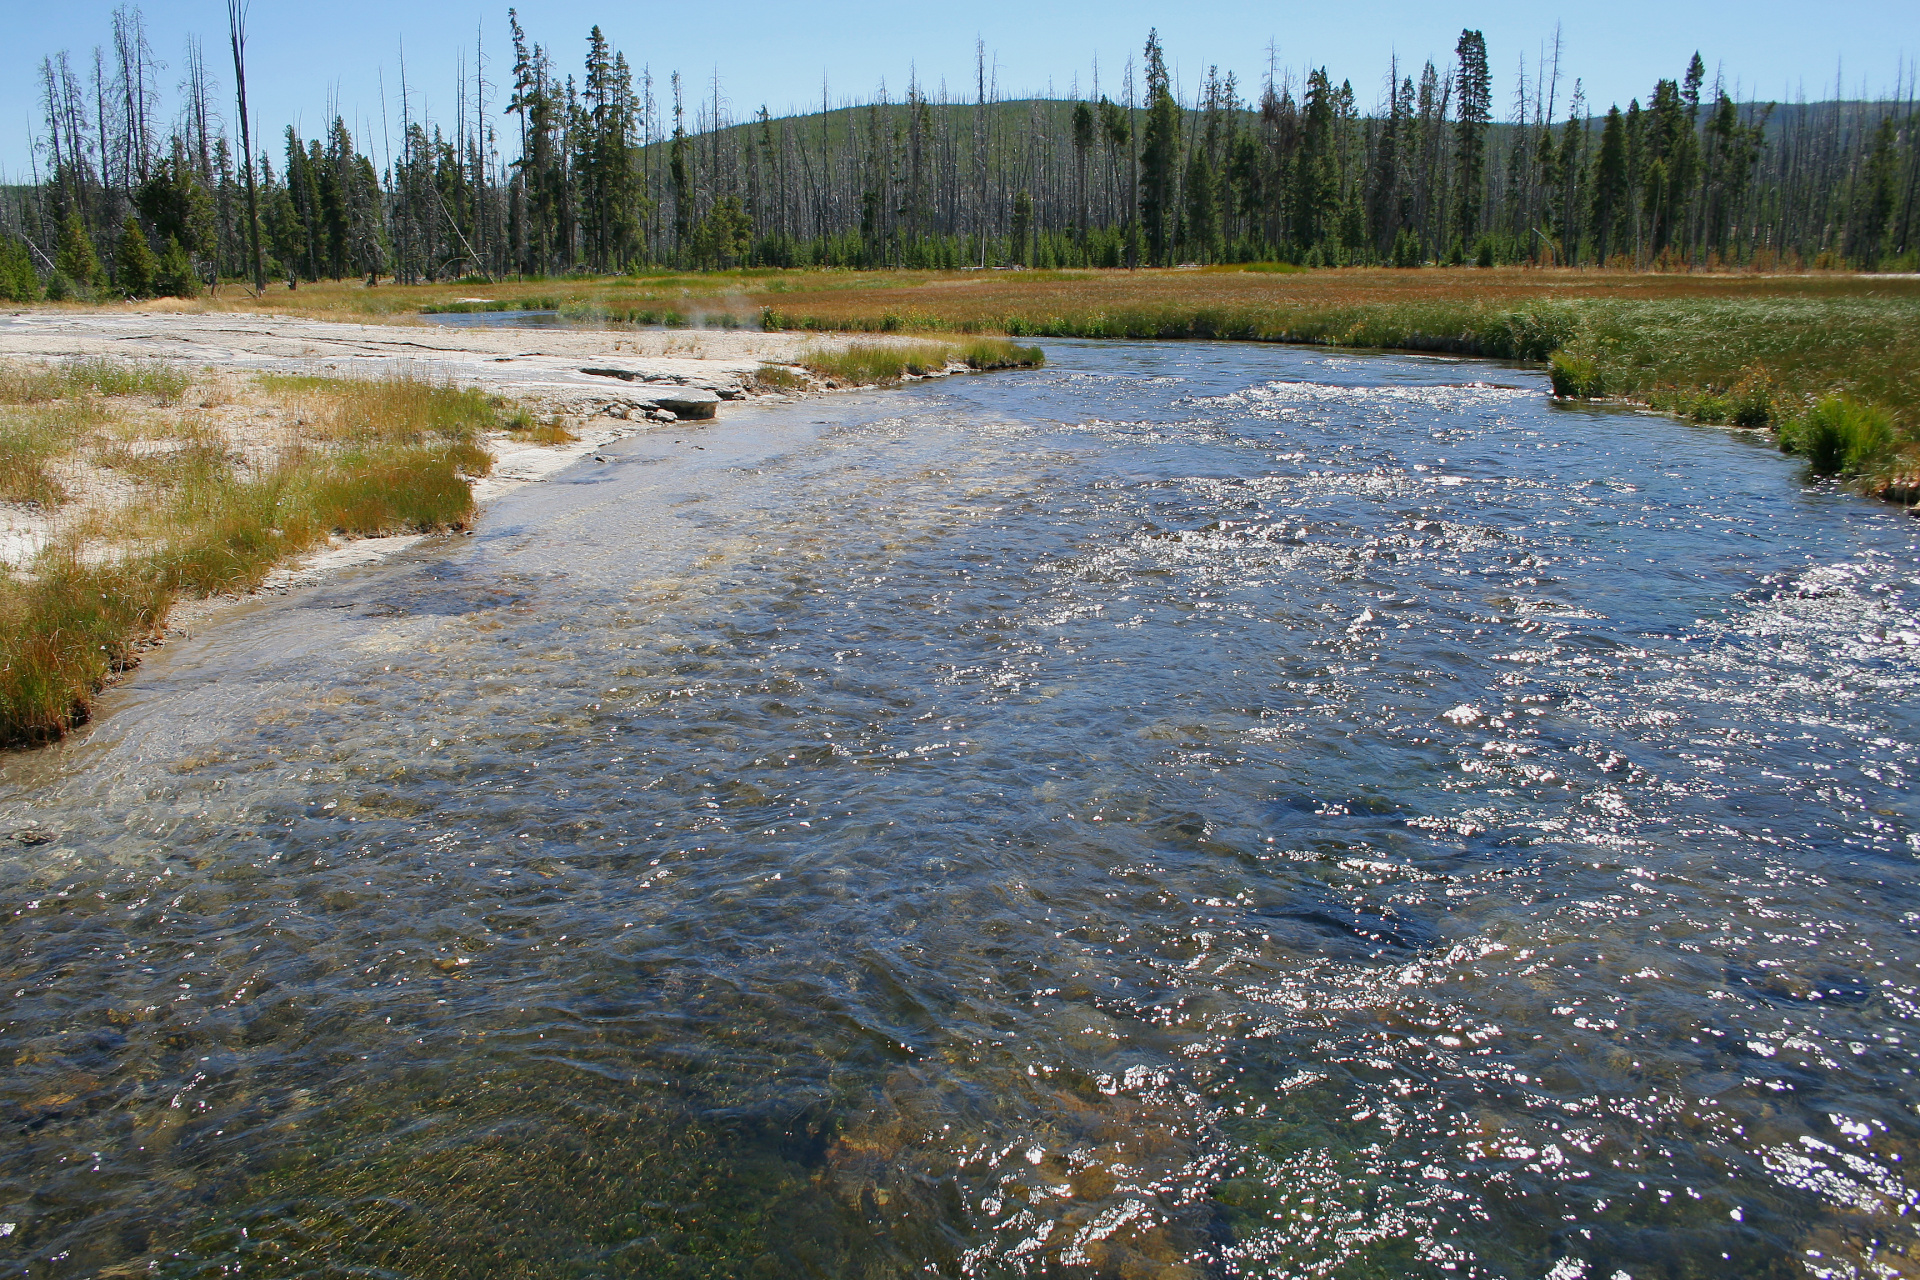 Iron Spring Creek (Travels » US Trip 1: Cheyenne Country » The Journey » Yellowstone National Park » Geysers, Hot Springs and Lakes » Black Sand Basin)